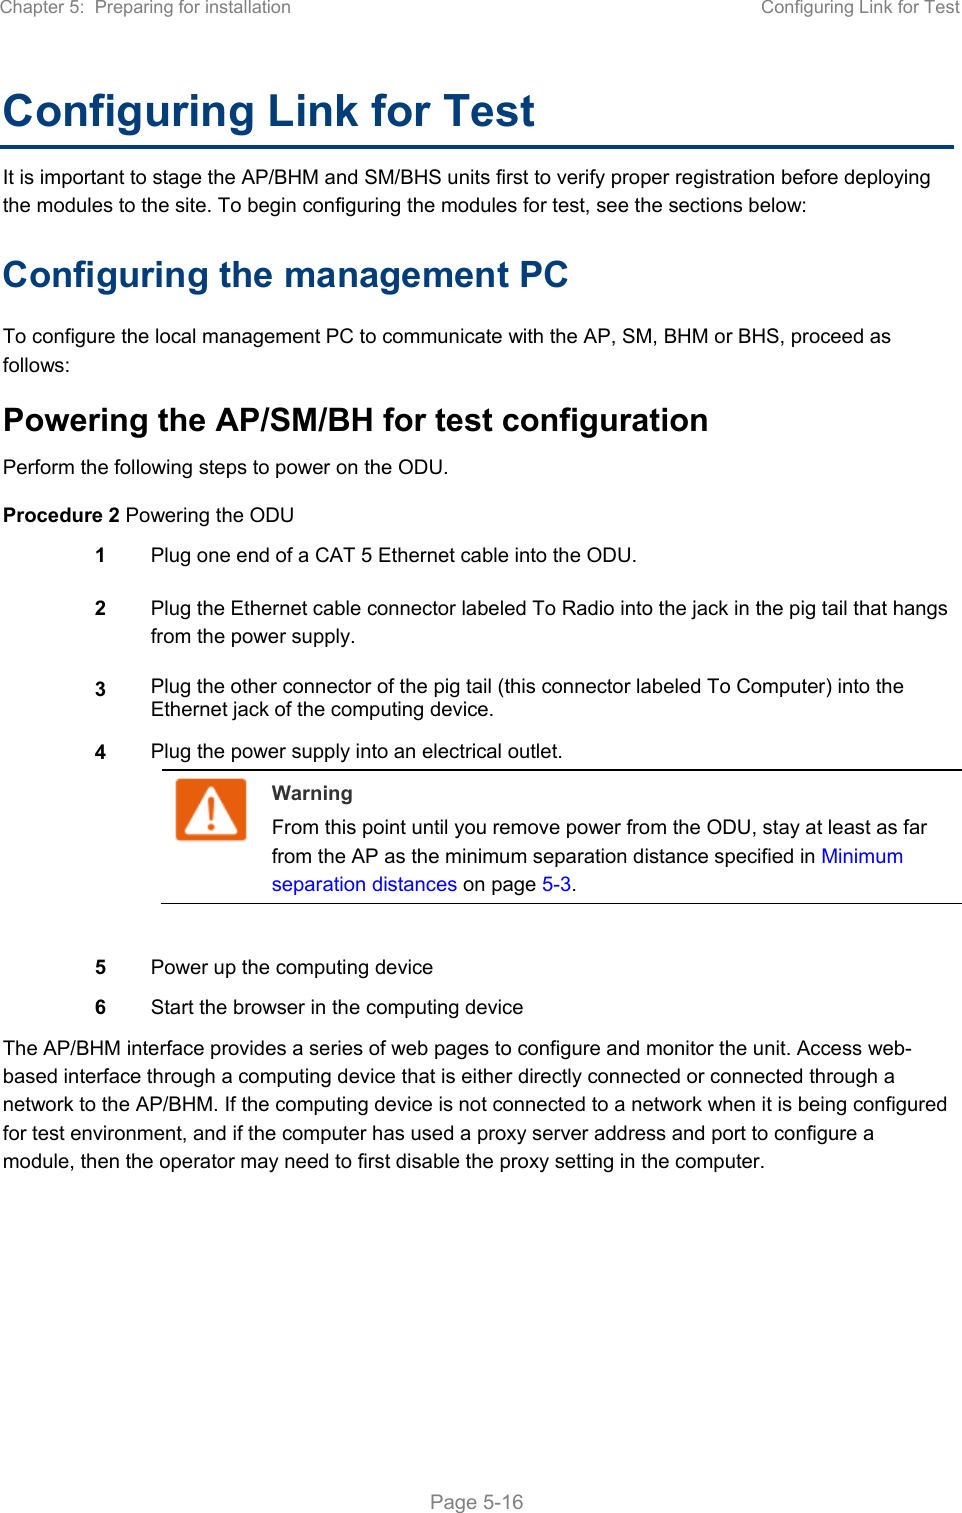 Chapter 5:  Preparing for installation  Configuring Link for Test   Page 5-16 Configuring Link for Test It is important to stage the AP/BHM and SM/BHS units first to verify proper registration before deploying the modules to the site. To begin configuring the modules for test, see the sections below: Configuring the management PC To configure the local management PC to communicate with the AP, SM, BHM or BHS, proceed as follows: Powering the AP/SM/BH for test configuration Perform the following steps to power on the ODU. Procedure 2 Powering the ODU 1  Plug one end of a CAT 5 Ethernet cable into the ODU. 2  Plug the Ethernet cable connector labeled To Radio into the jack in the pig tail that hangs from the power supply. 3  Plug the other connector of the pig tail (this connector labeled To Computer) into the Ethernet jack of the computing device. 4  Plug the power supply into an electrical outlet.  Warning From this point until you remove power from the ODU, stay at least as far from the AP as the minimum separation distance specified in Minimum separation distances on page 5-3.   5  Power up the computing device 6  Start the browser in the computing device The AP/BHM interface provides a series of web pages to configure and monitor the unit. Access web-based interface through a computing device that is either directly connected or connected through a network to the AP/BHM. If the computing device is not connected to a network when it is being configured for test environment, and if the computer has used a proxy server address and port to configure a module, then the operator may need to first disable the proxy setting in the computer.      